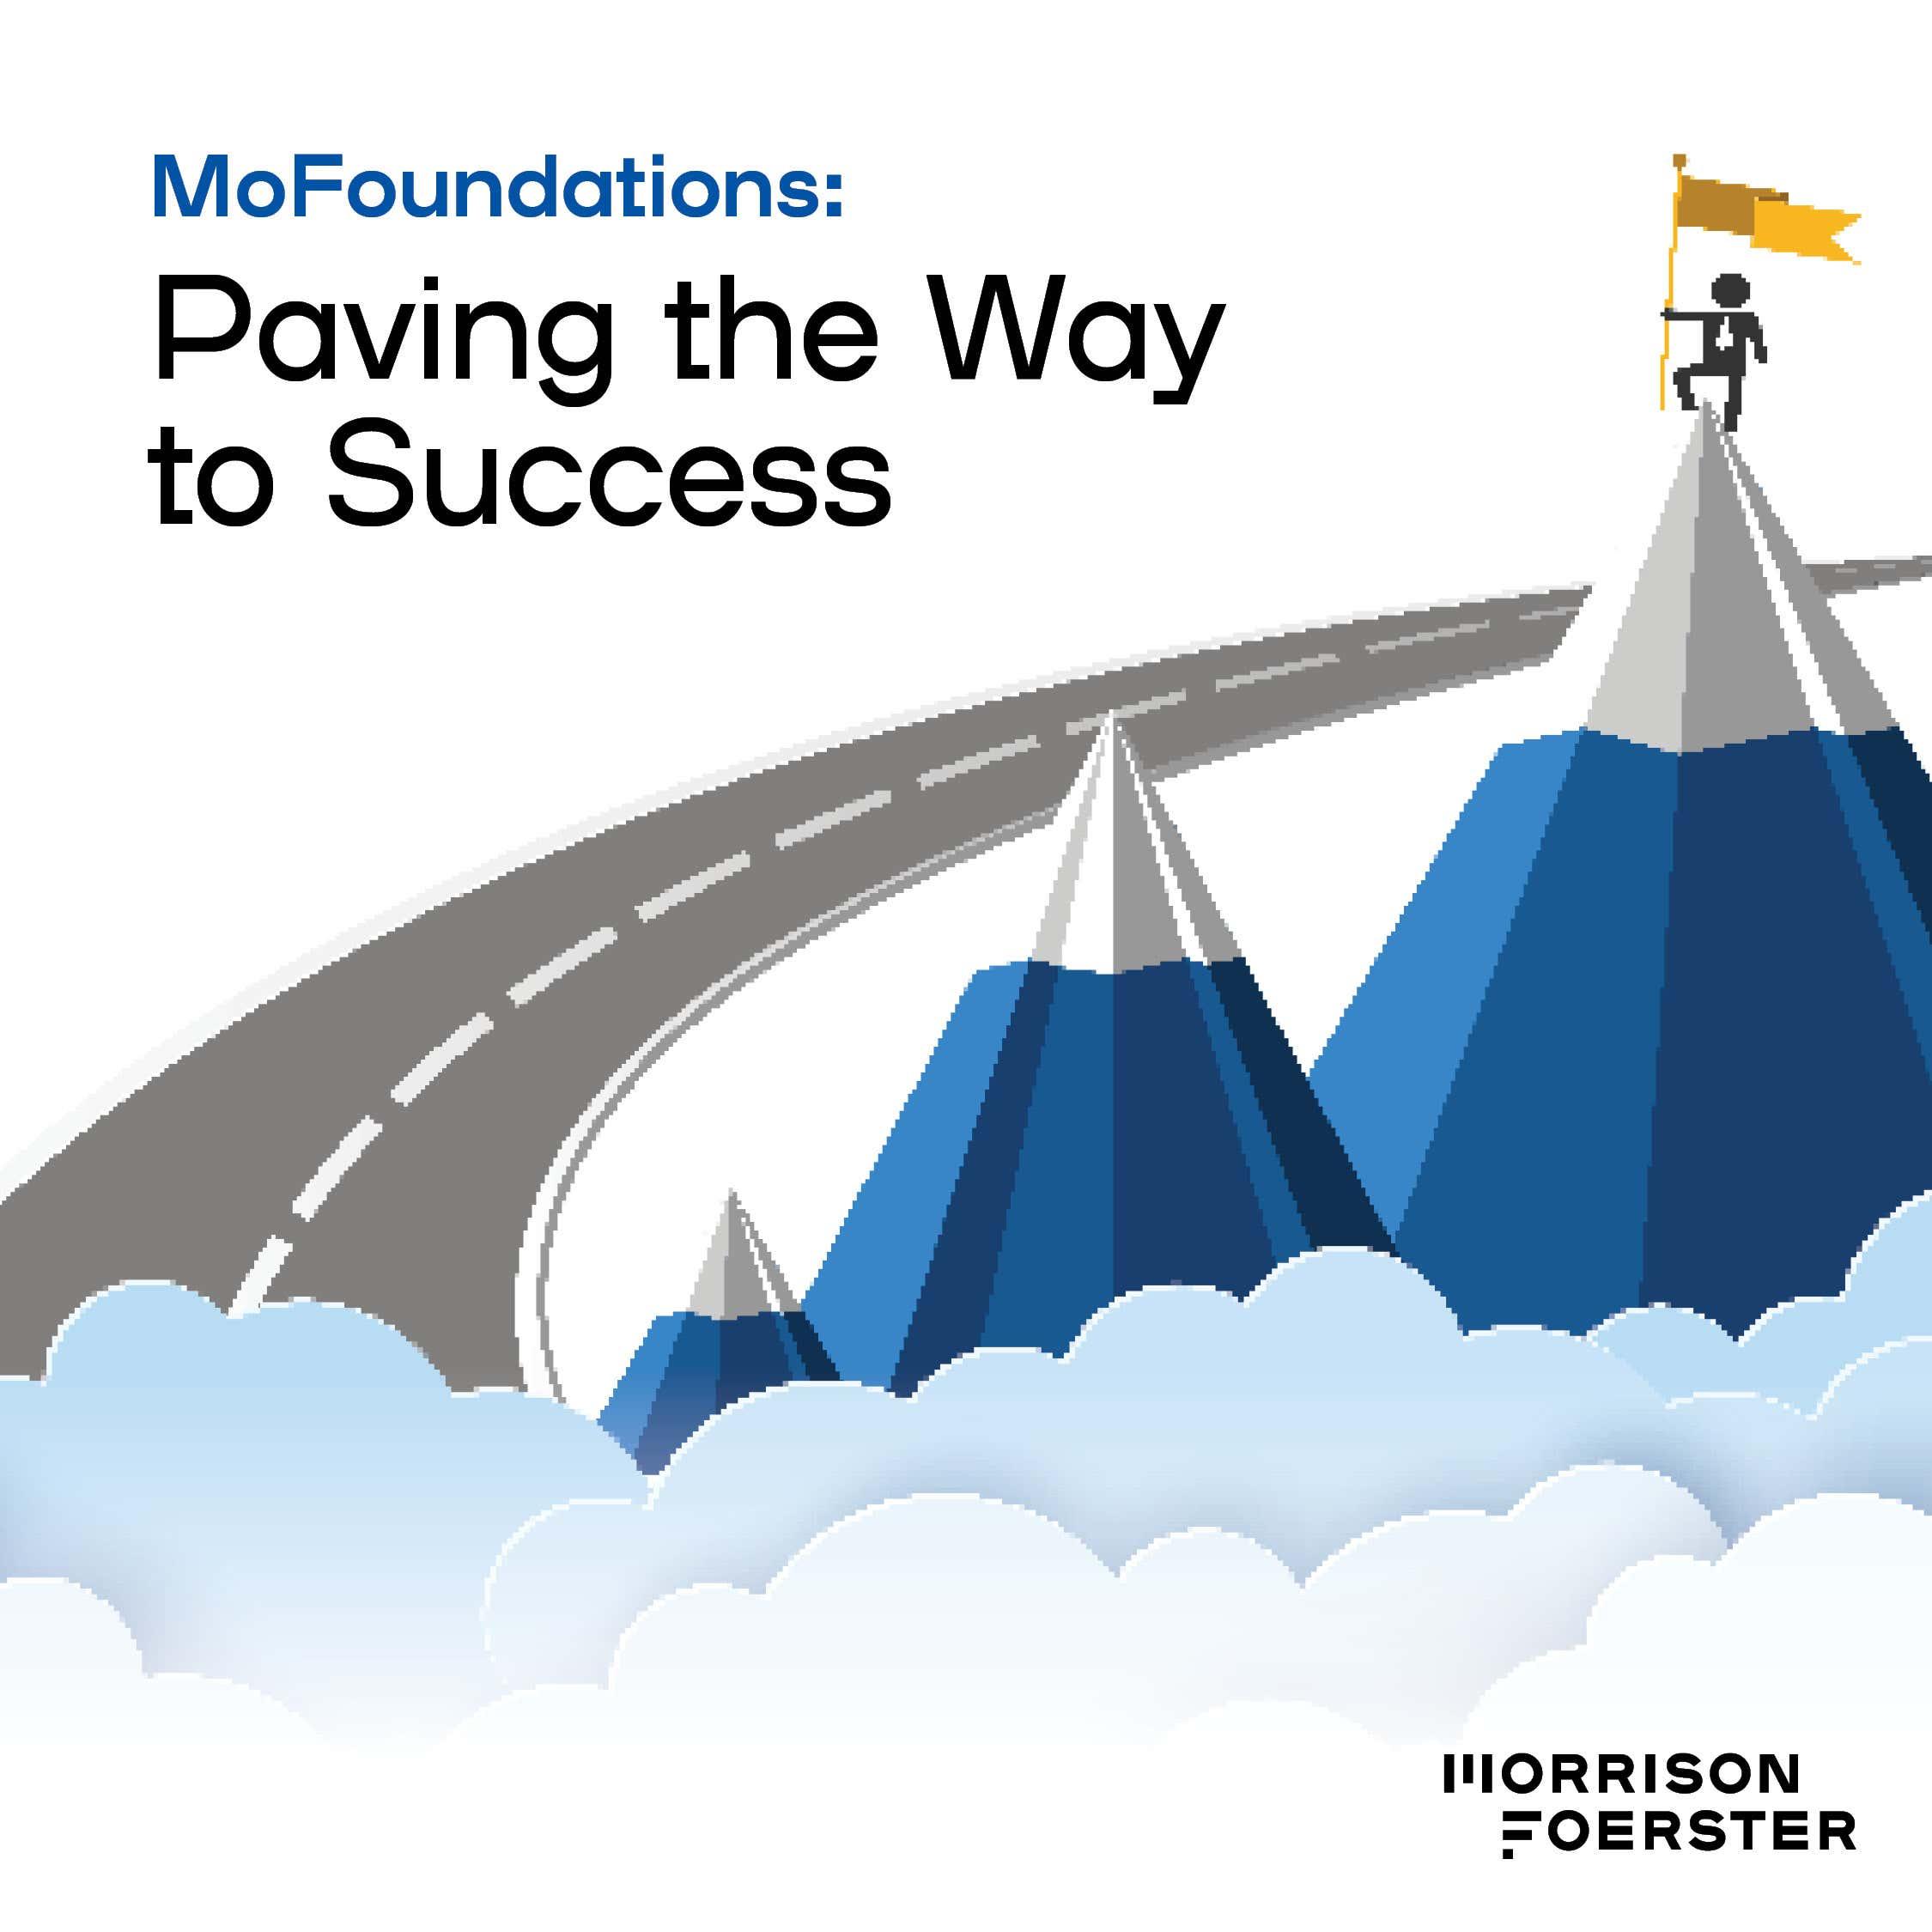 MoFoundations: Paving the Way to Success